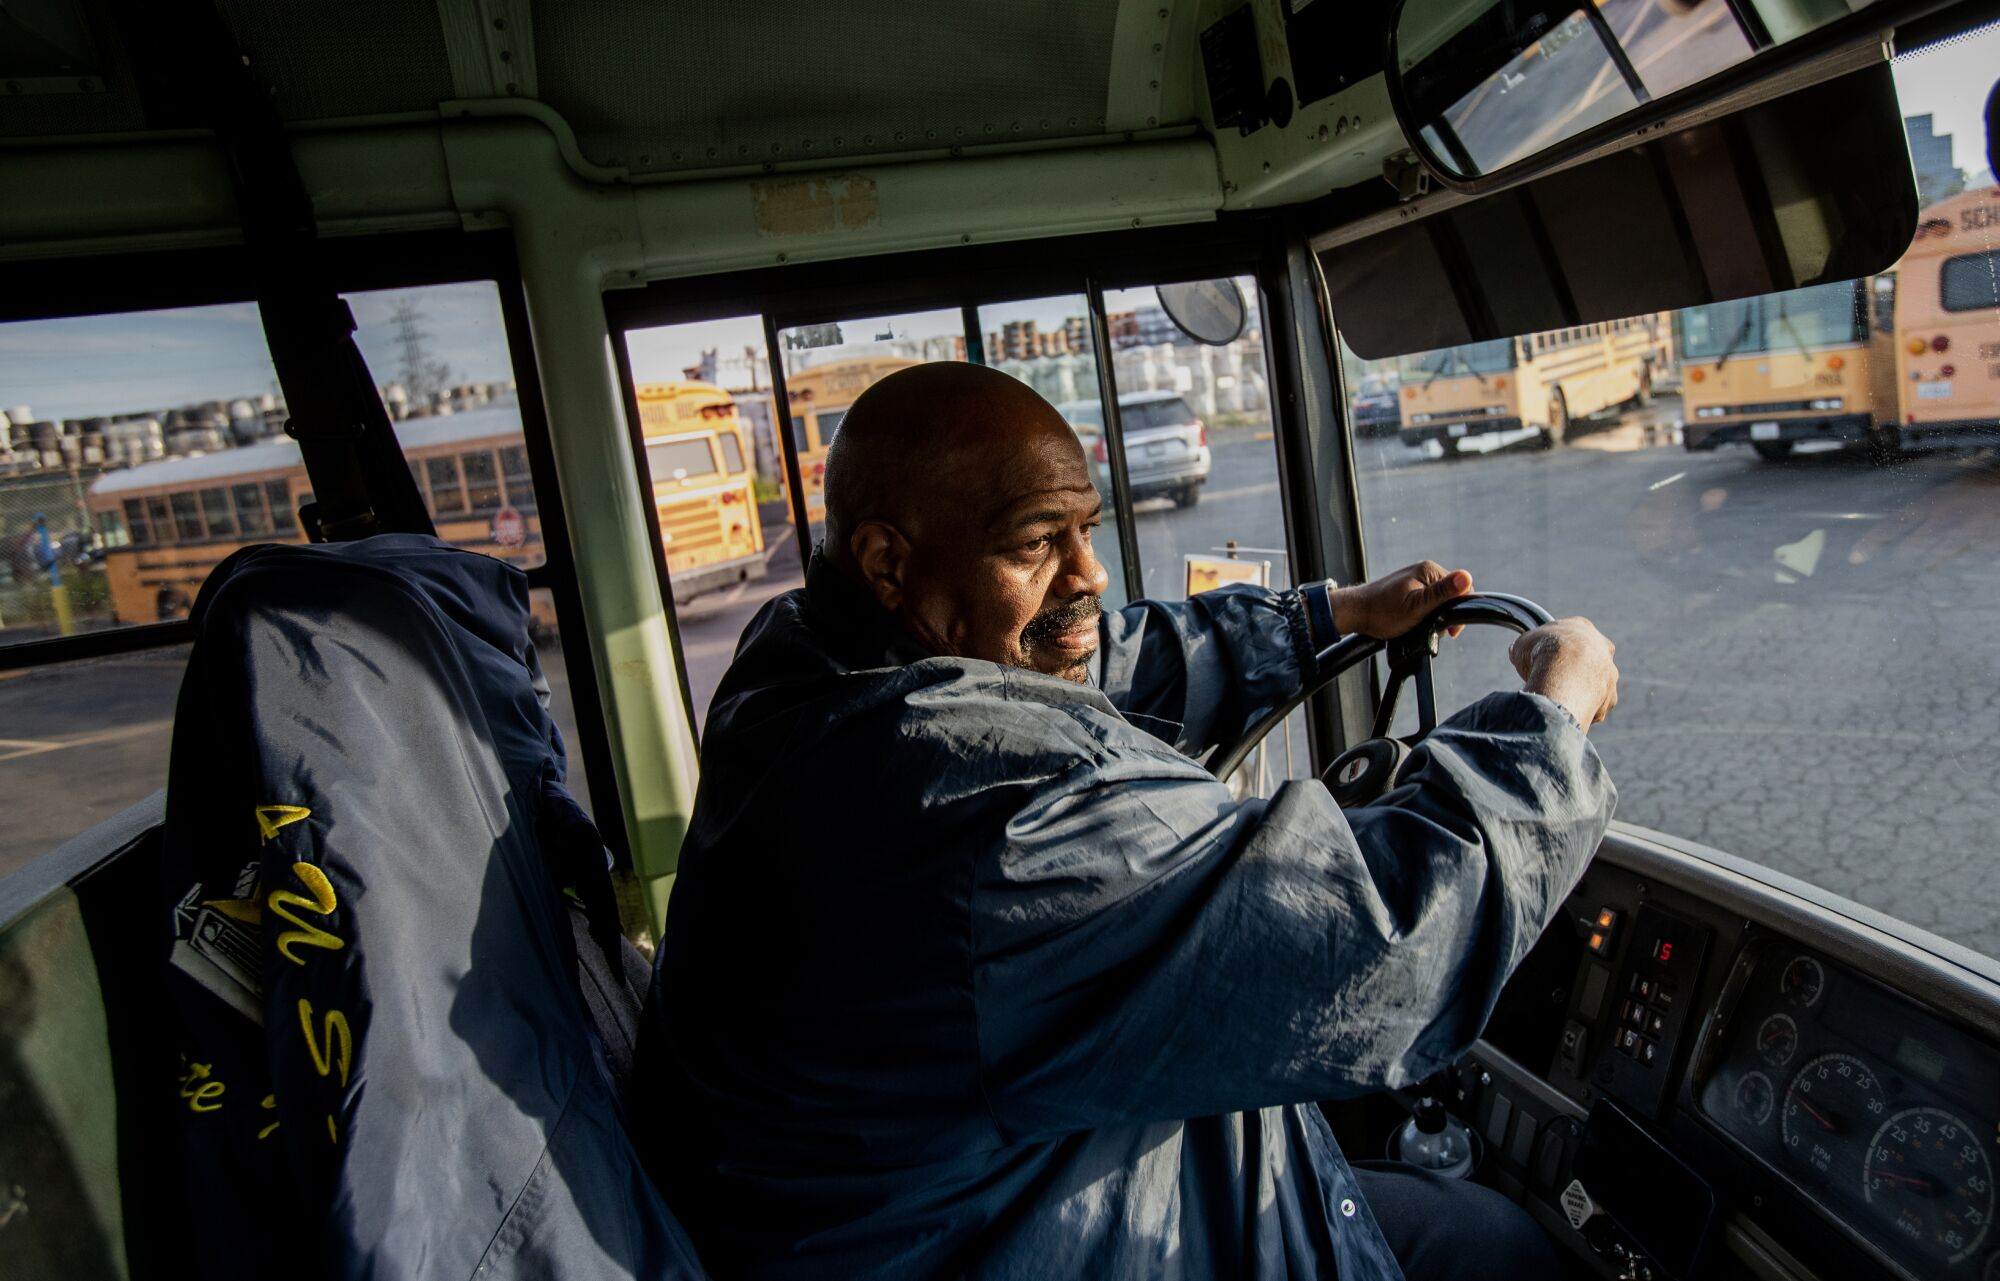 A man sits in the driver's seat of a school bus, holding onto the steering wheel, partially lighted by sun.